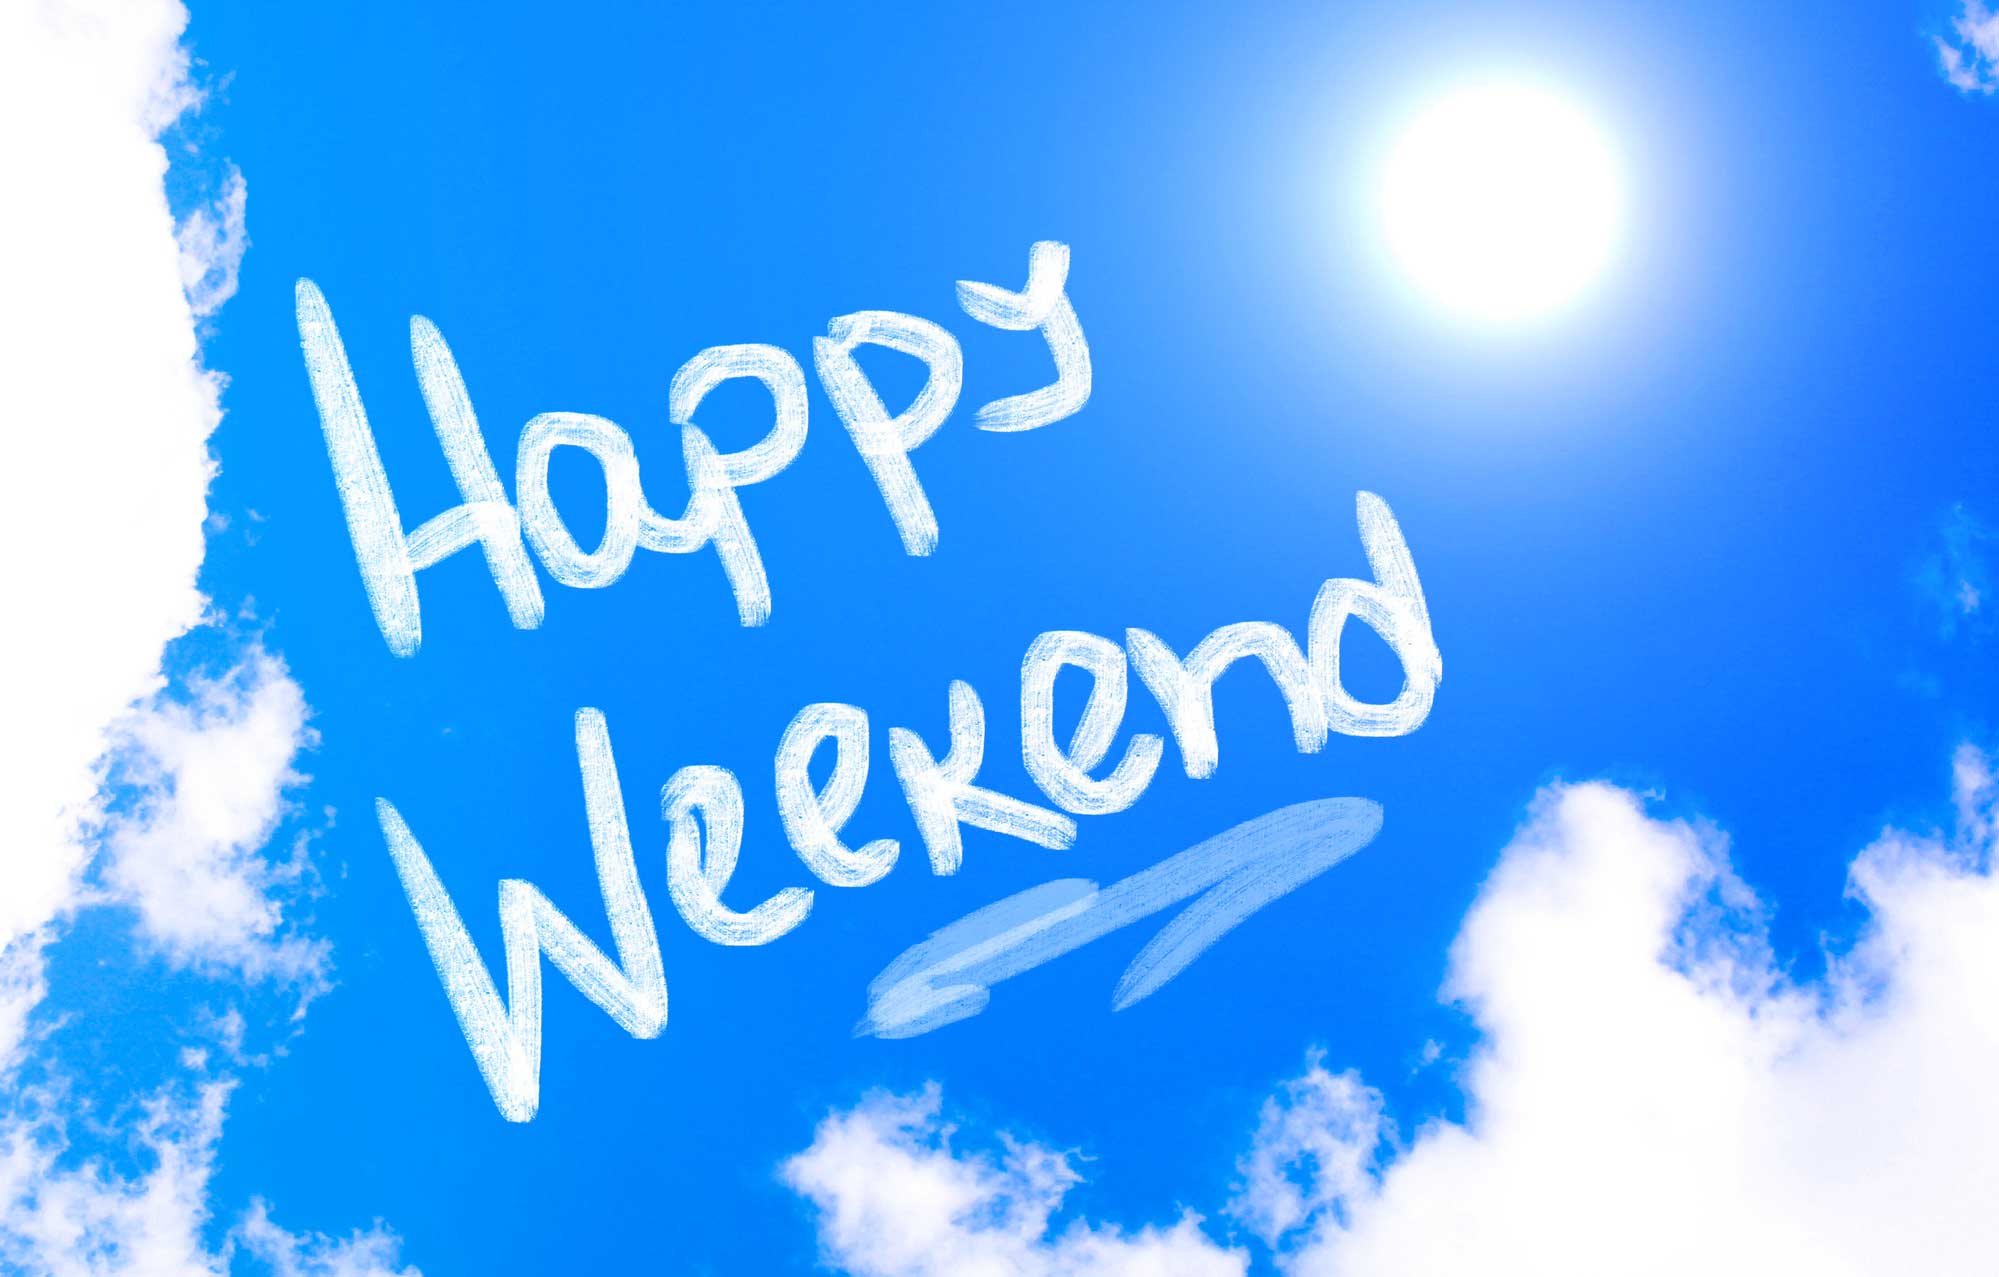 Have a Happy Weekend Friends!